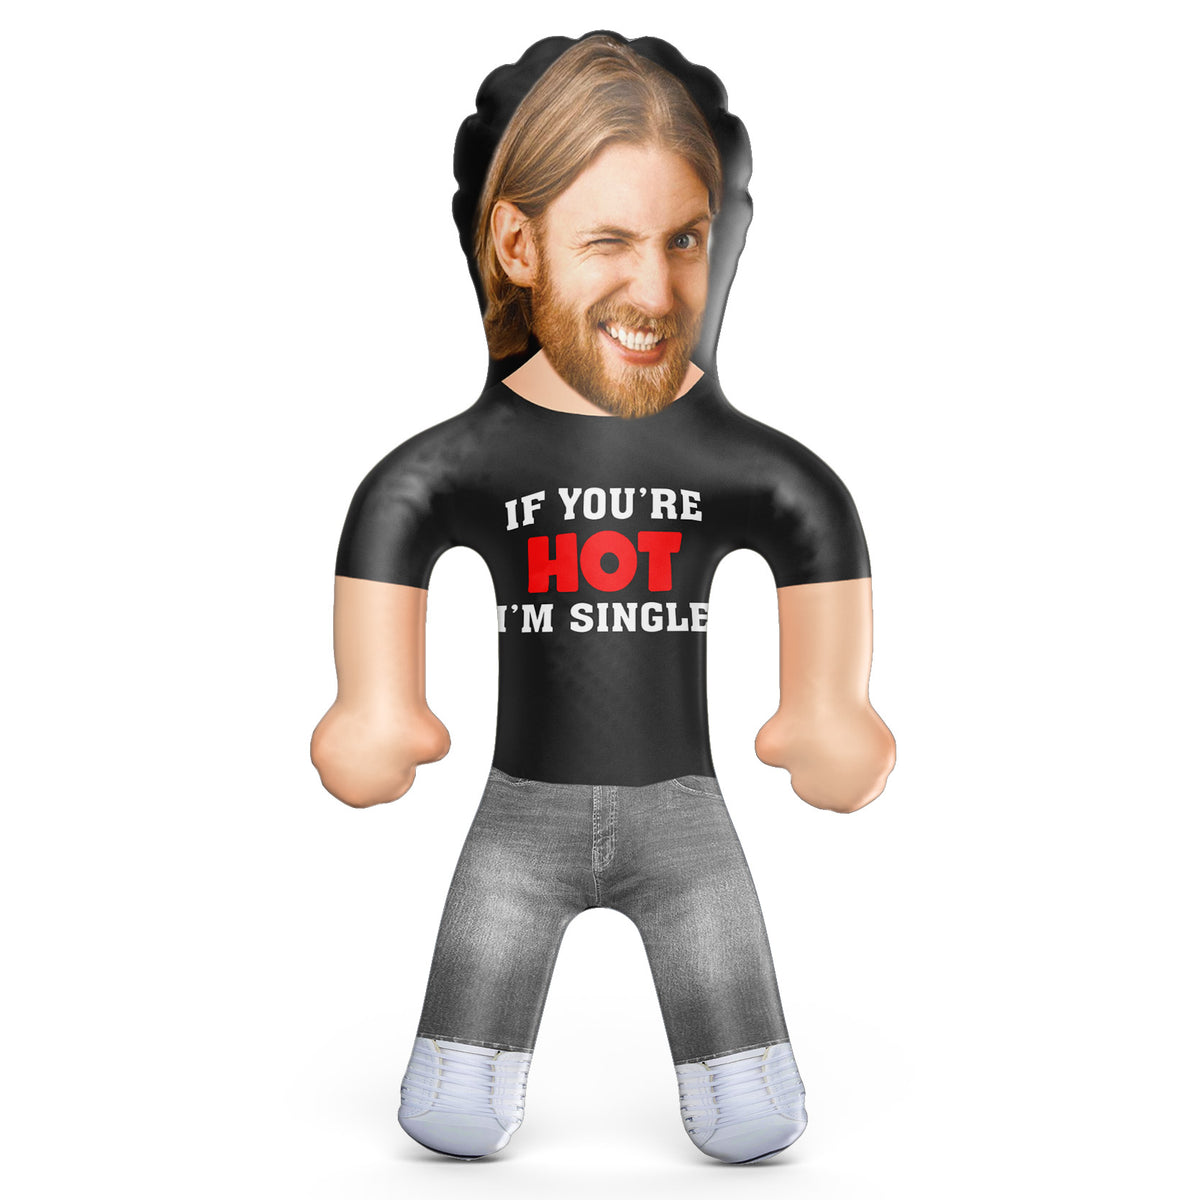 If You're Hot I'm Single? Inflatable Doll - I'm Single Blow Up Doll